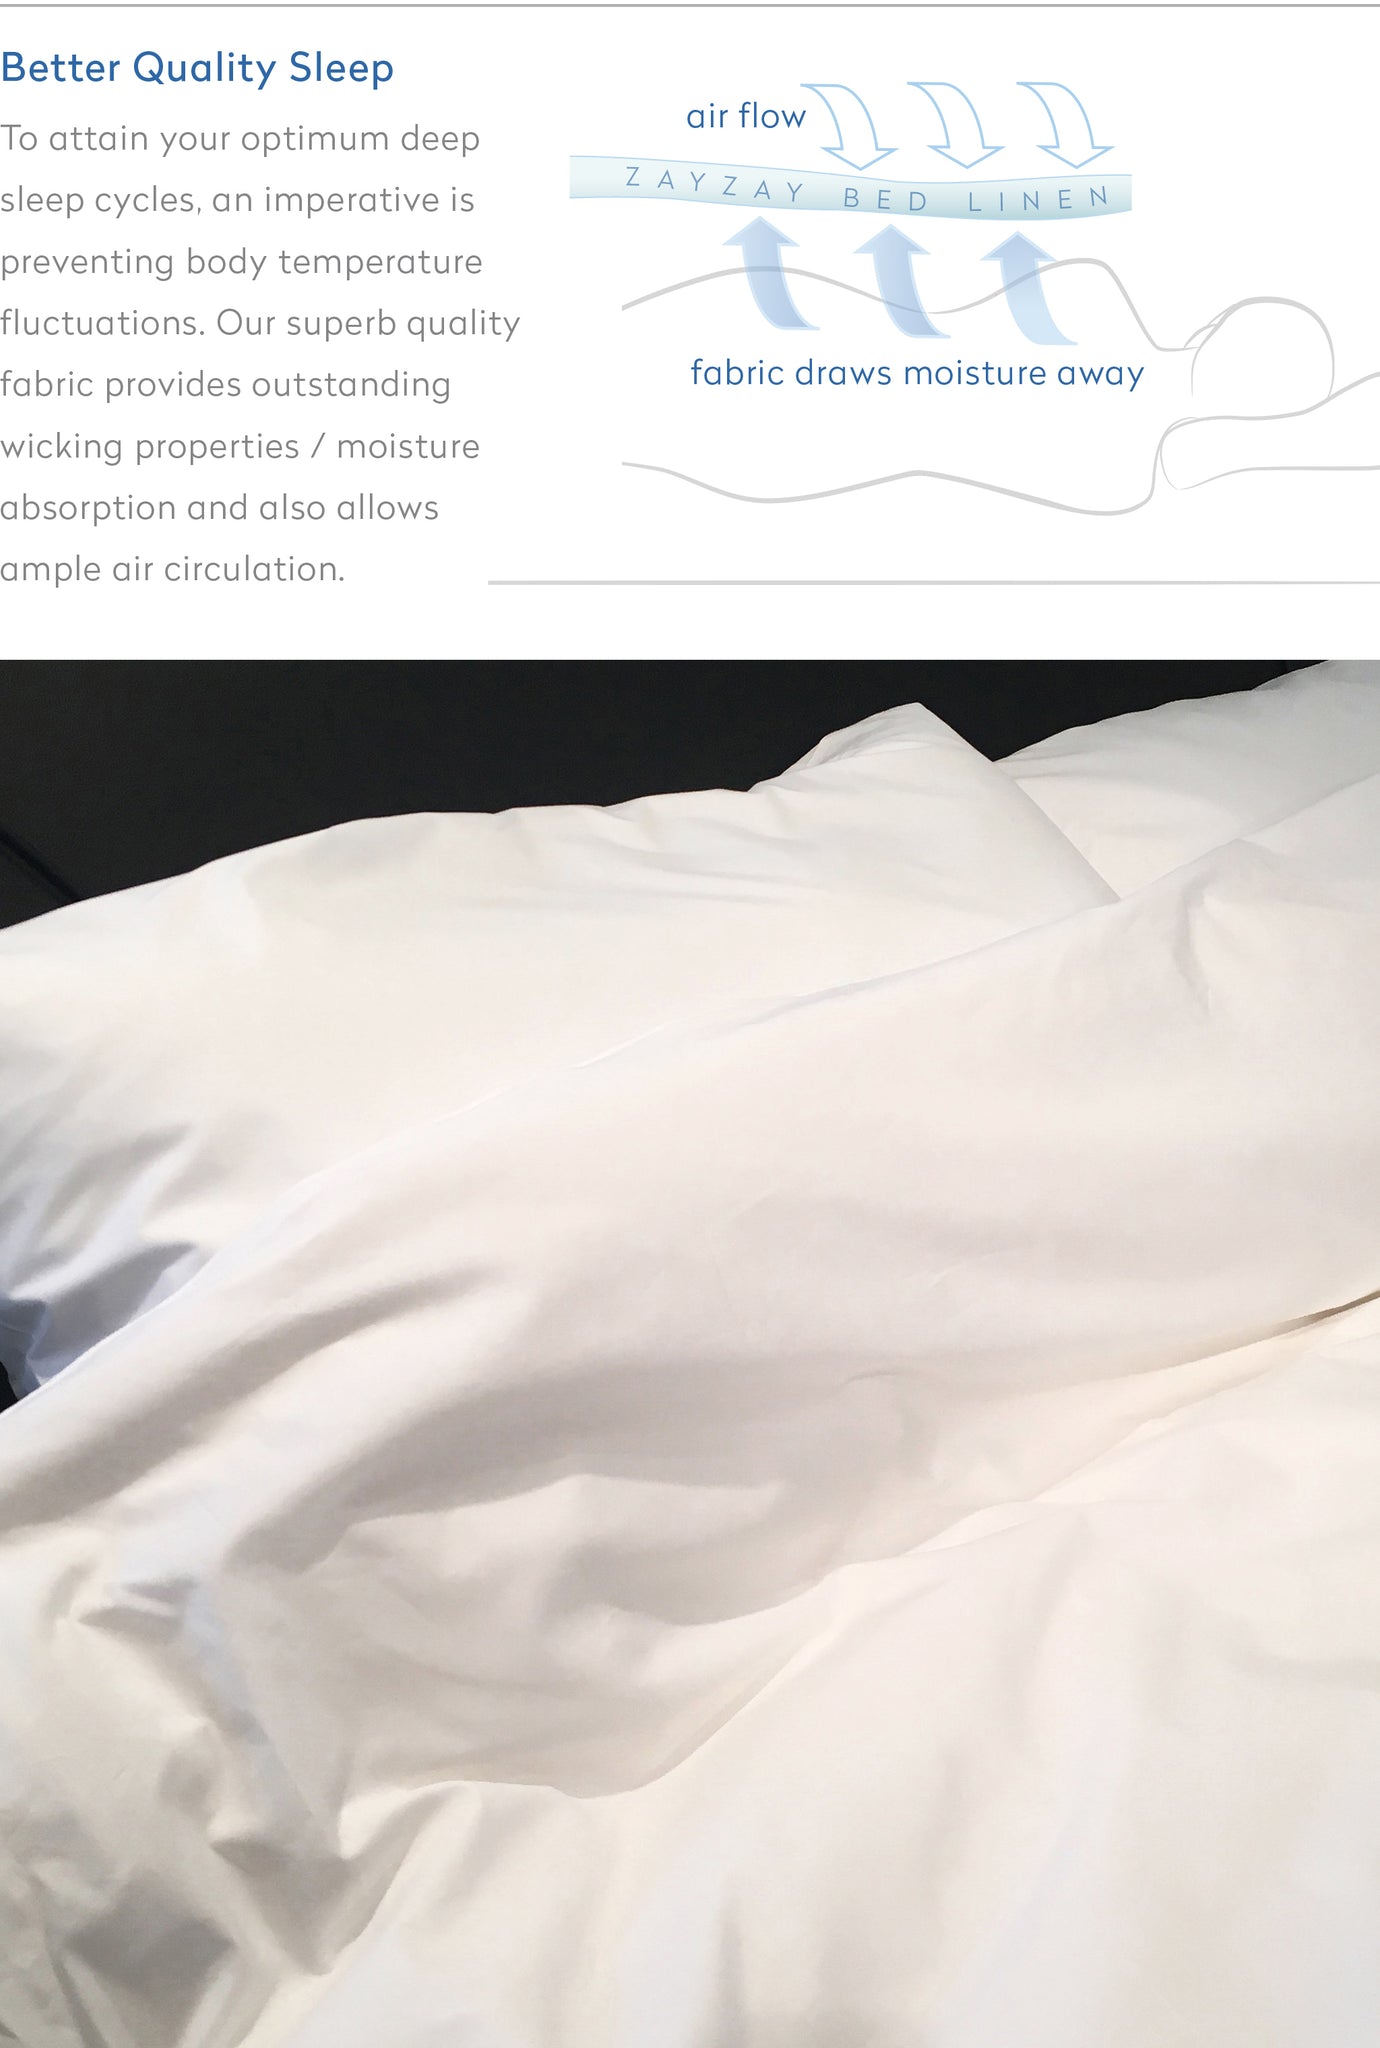 Better quality sleep air flow, photo of sheets and pillowcase